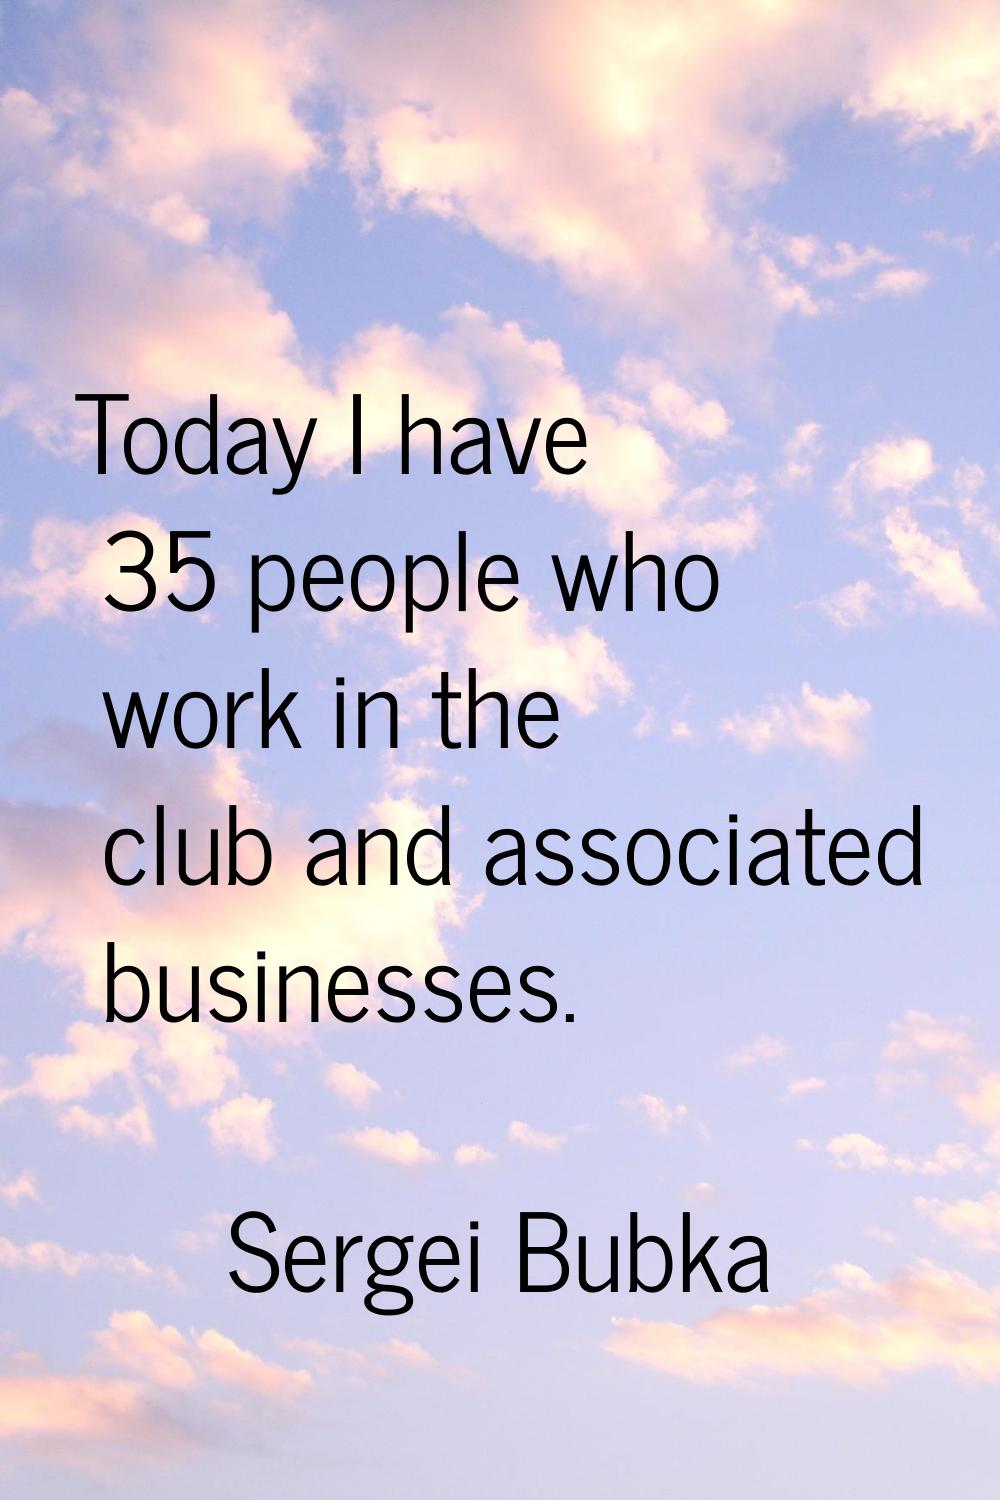 Today I have 35 people who work in the club and associated businesses.